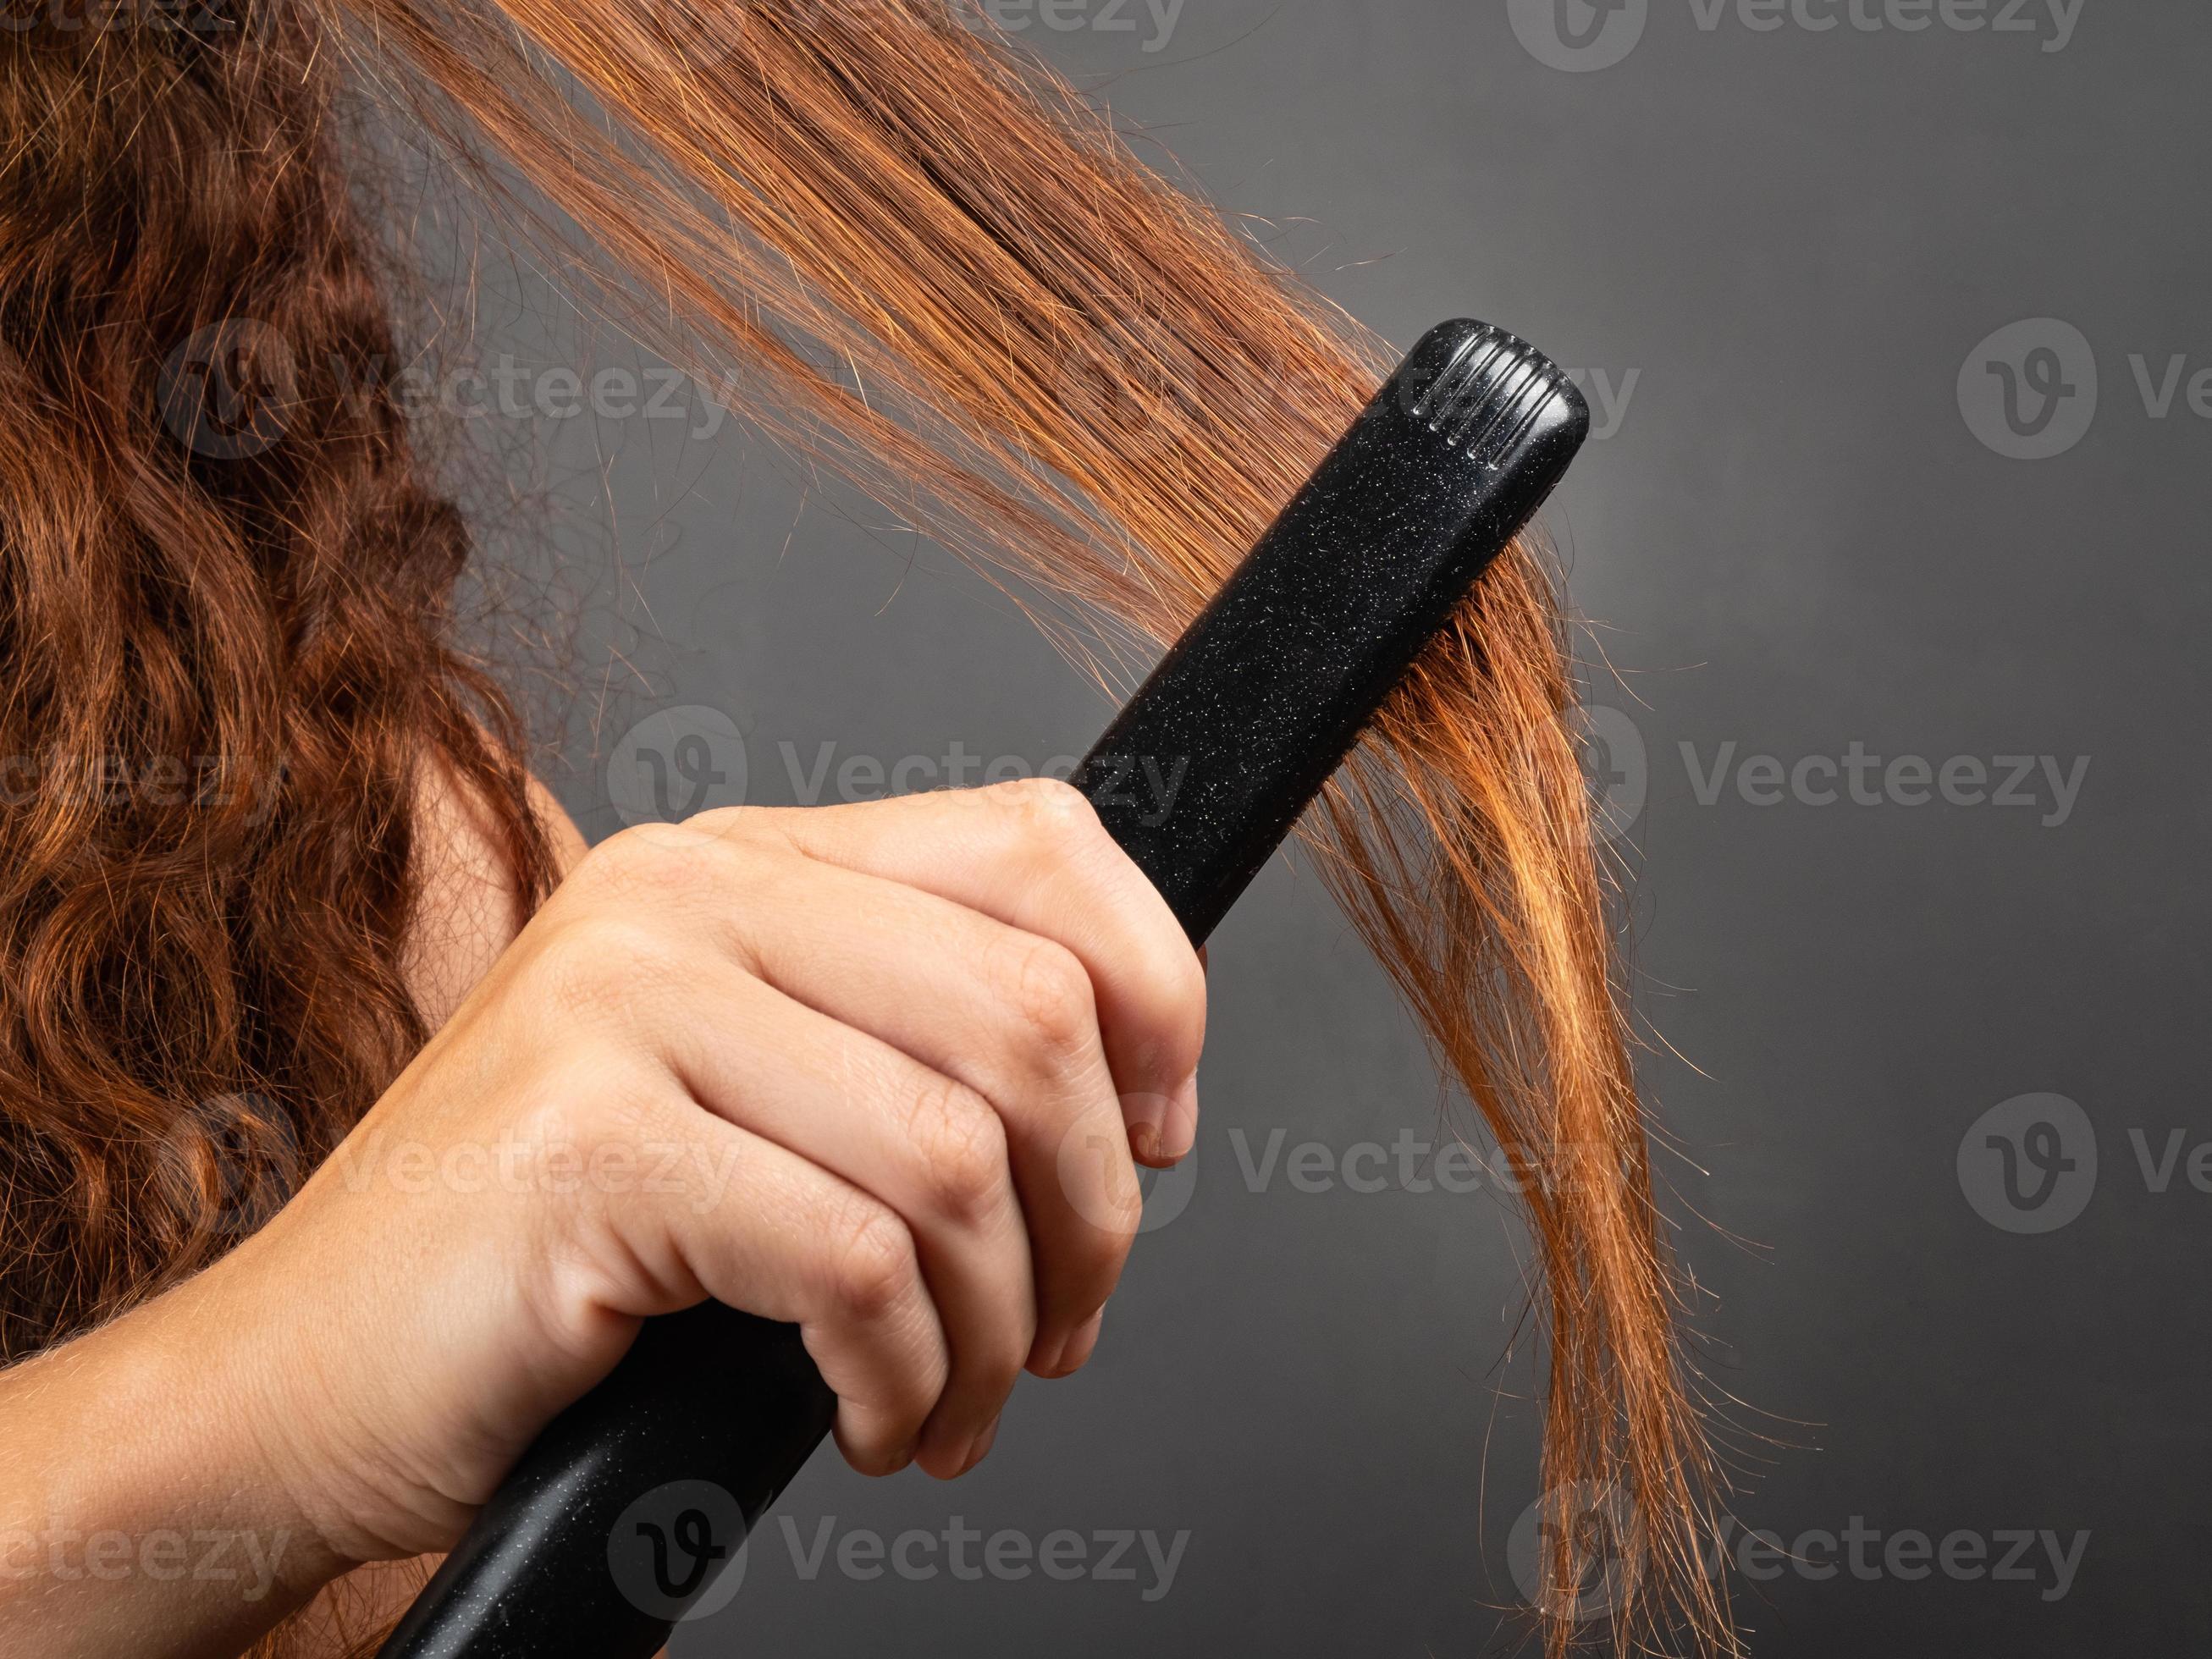 Girl smooths curly hair with a hair straightener, curling iron. 3246981  Stock Photo at Vecteezy